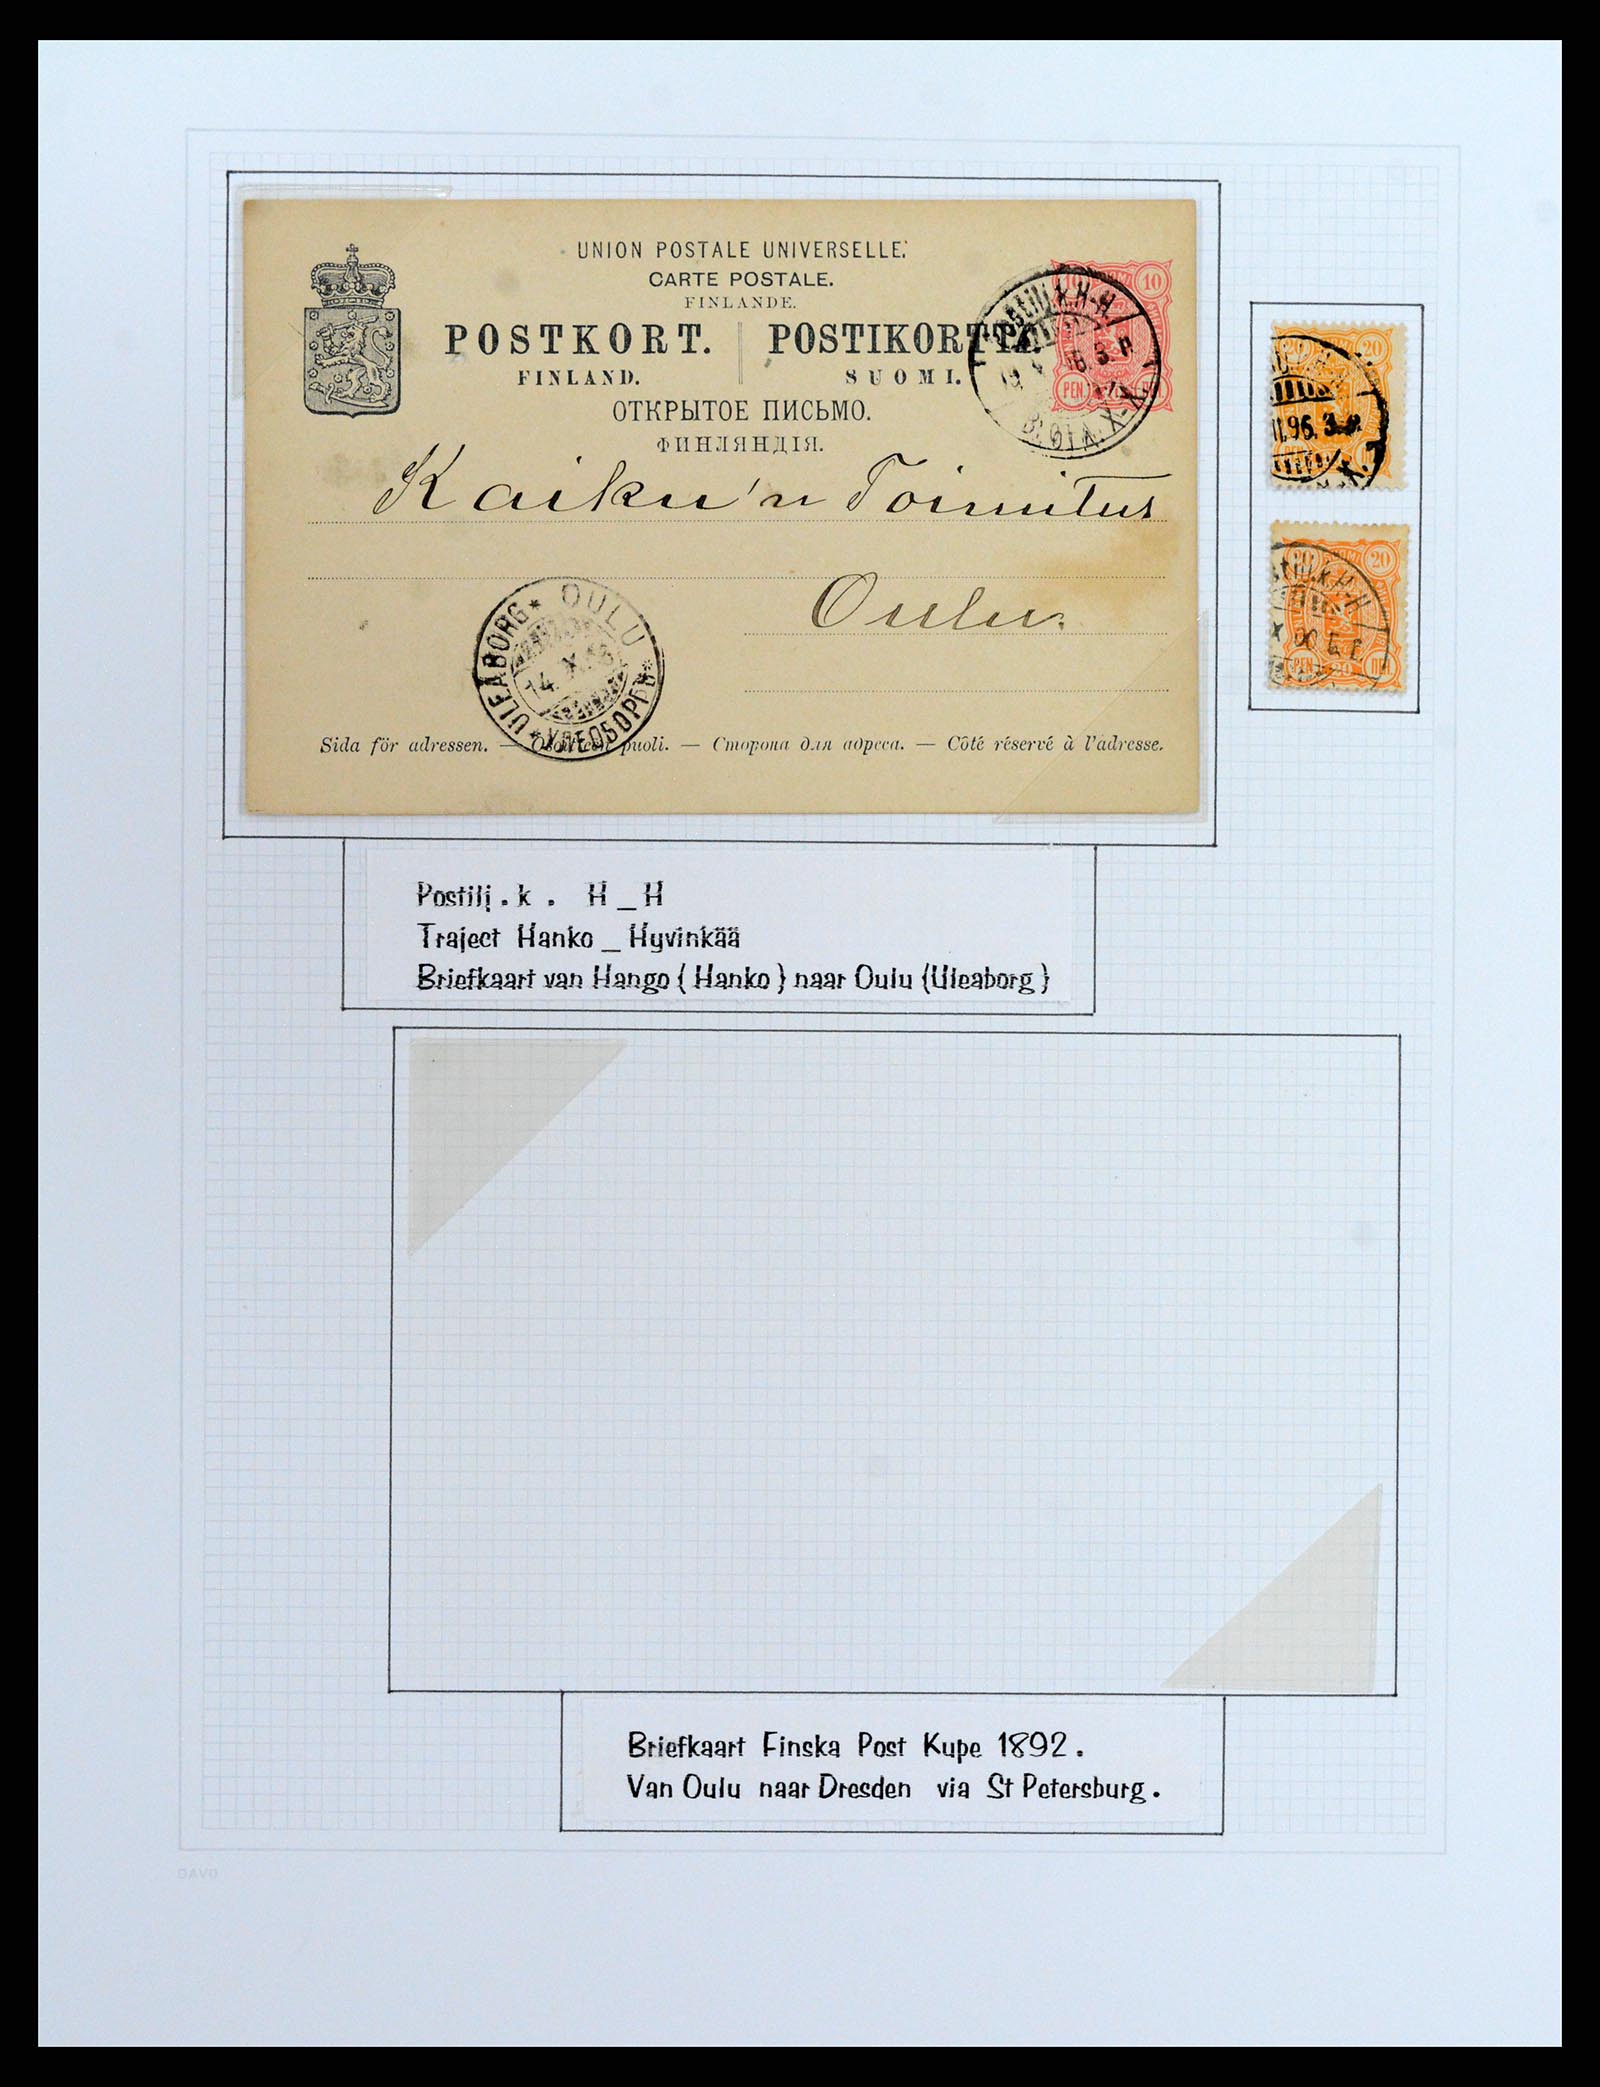 37766 100 - Stamp collection 37766 Finland railway cancellations 1870-1950.